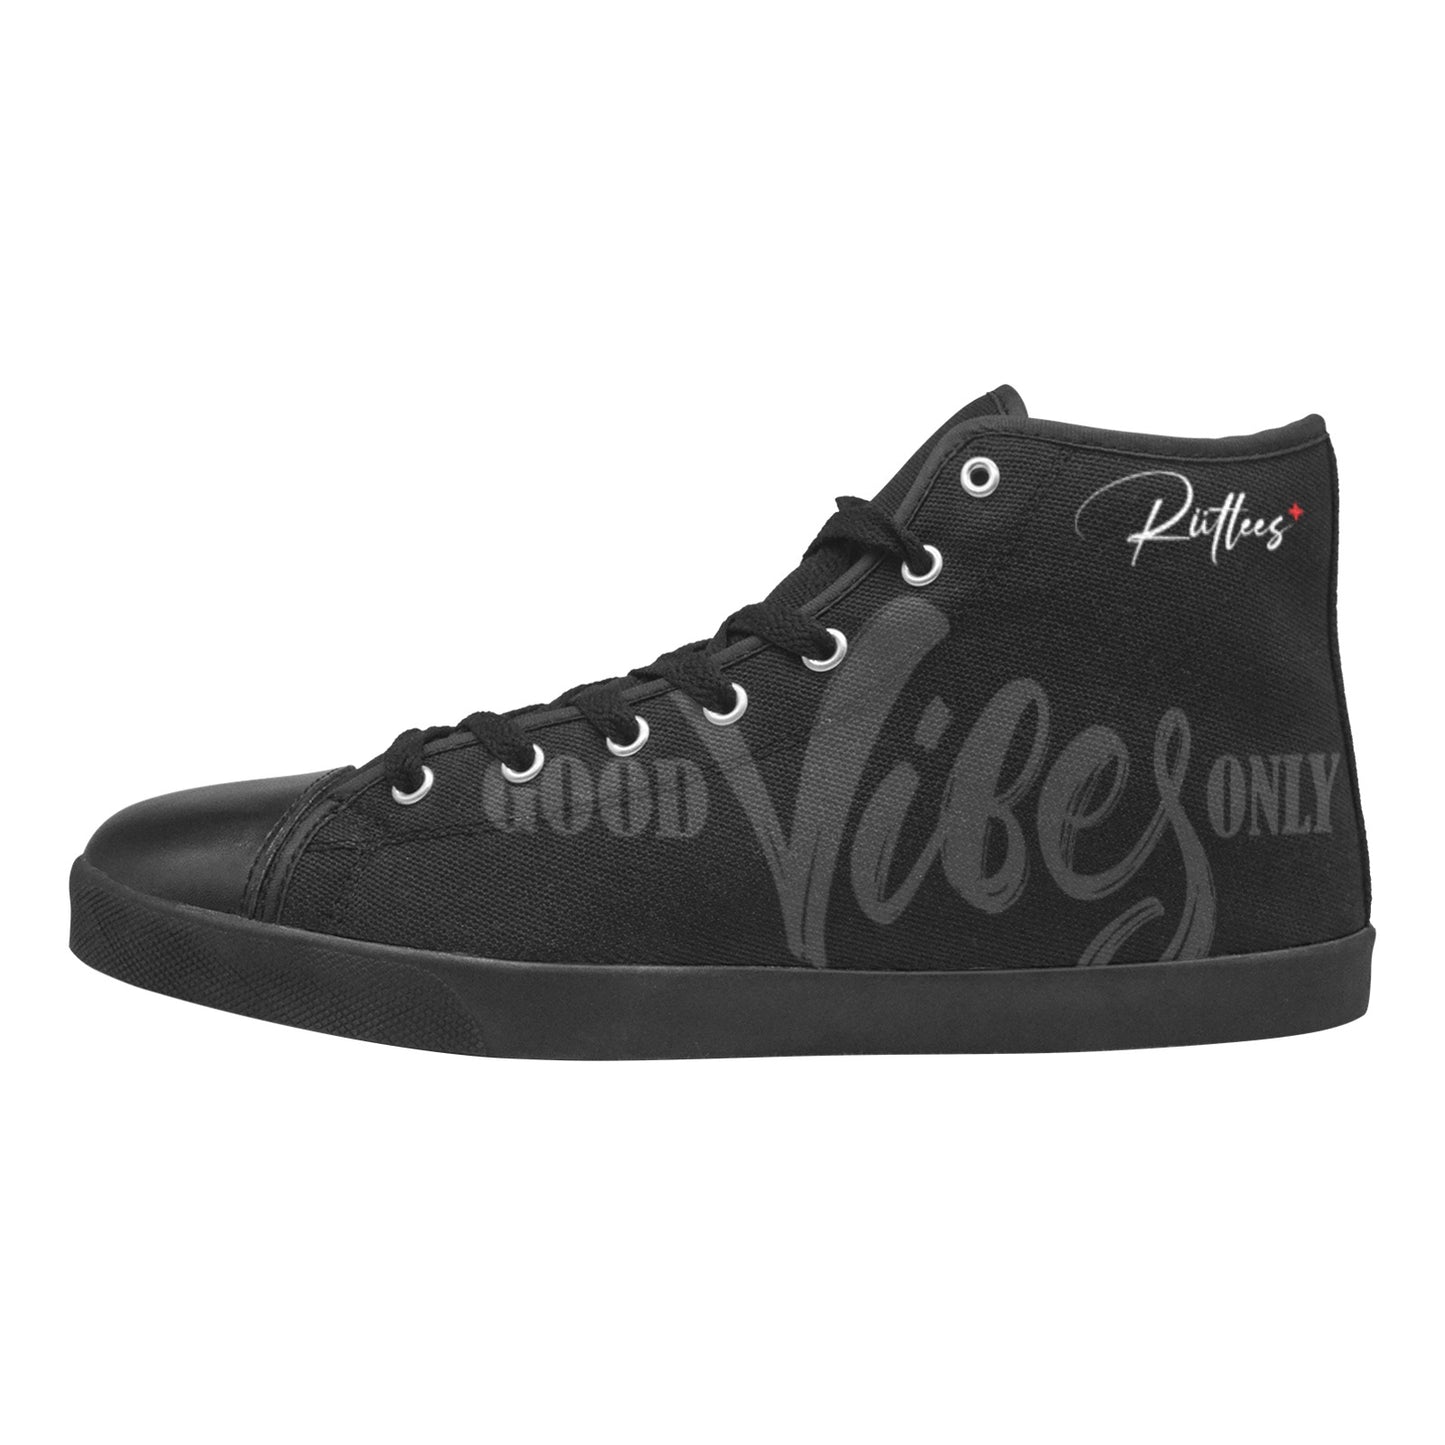 Good Vibes Only - Black High Top Canvas Men's Shoes